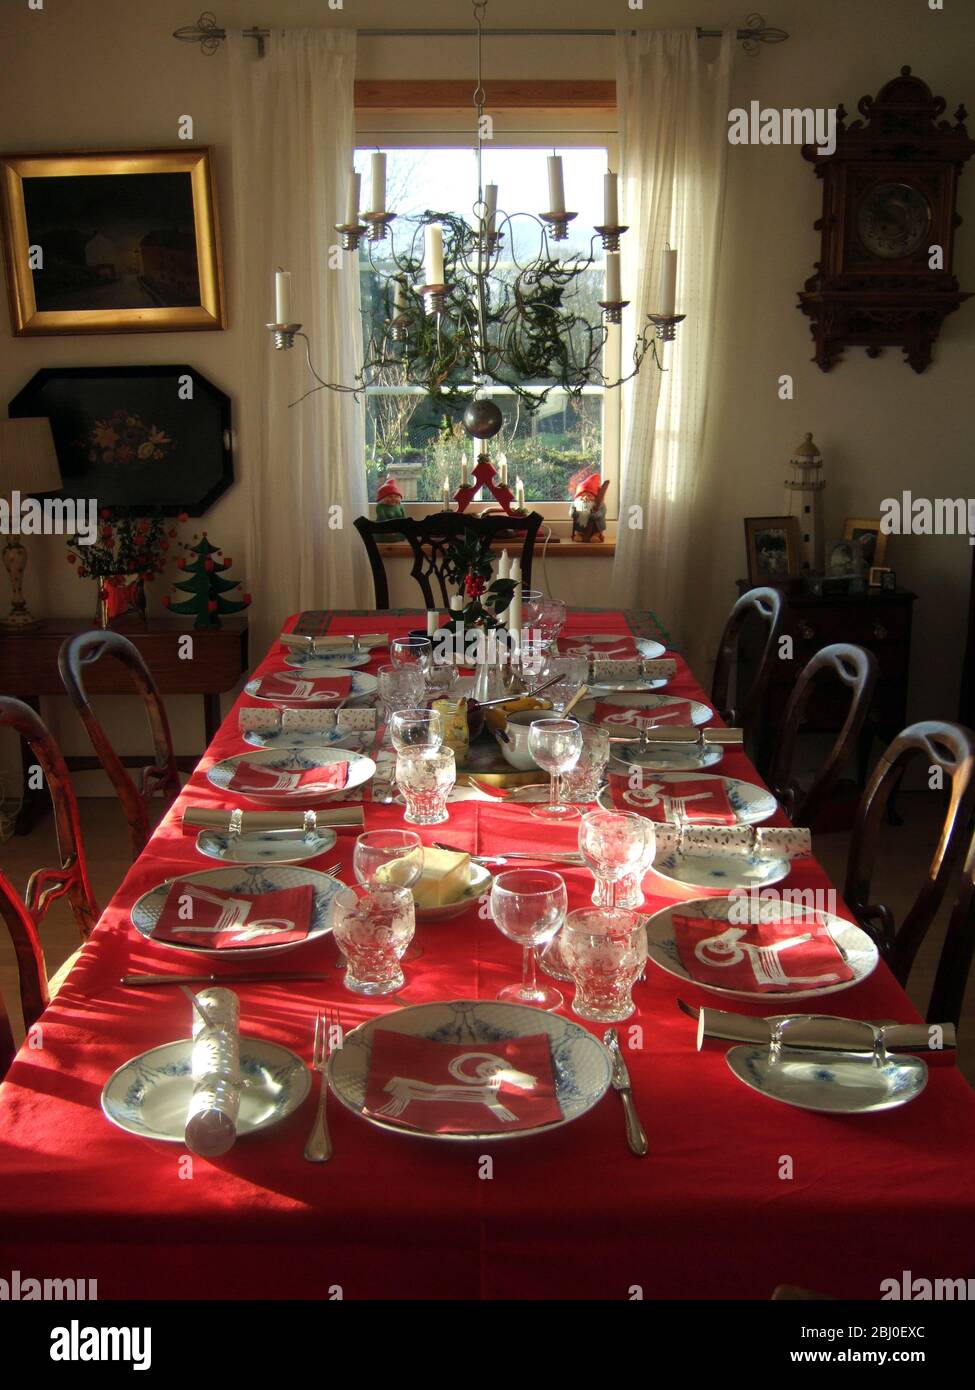 Sunlight shining in on interior with long table laid for Christmas meal with red tablecloth and best china, - Stock Photo